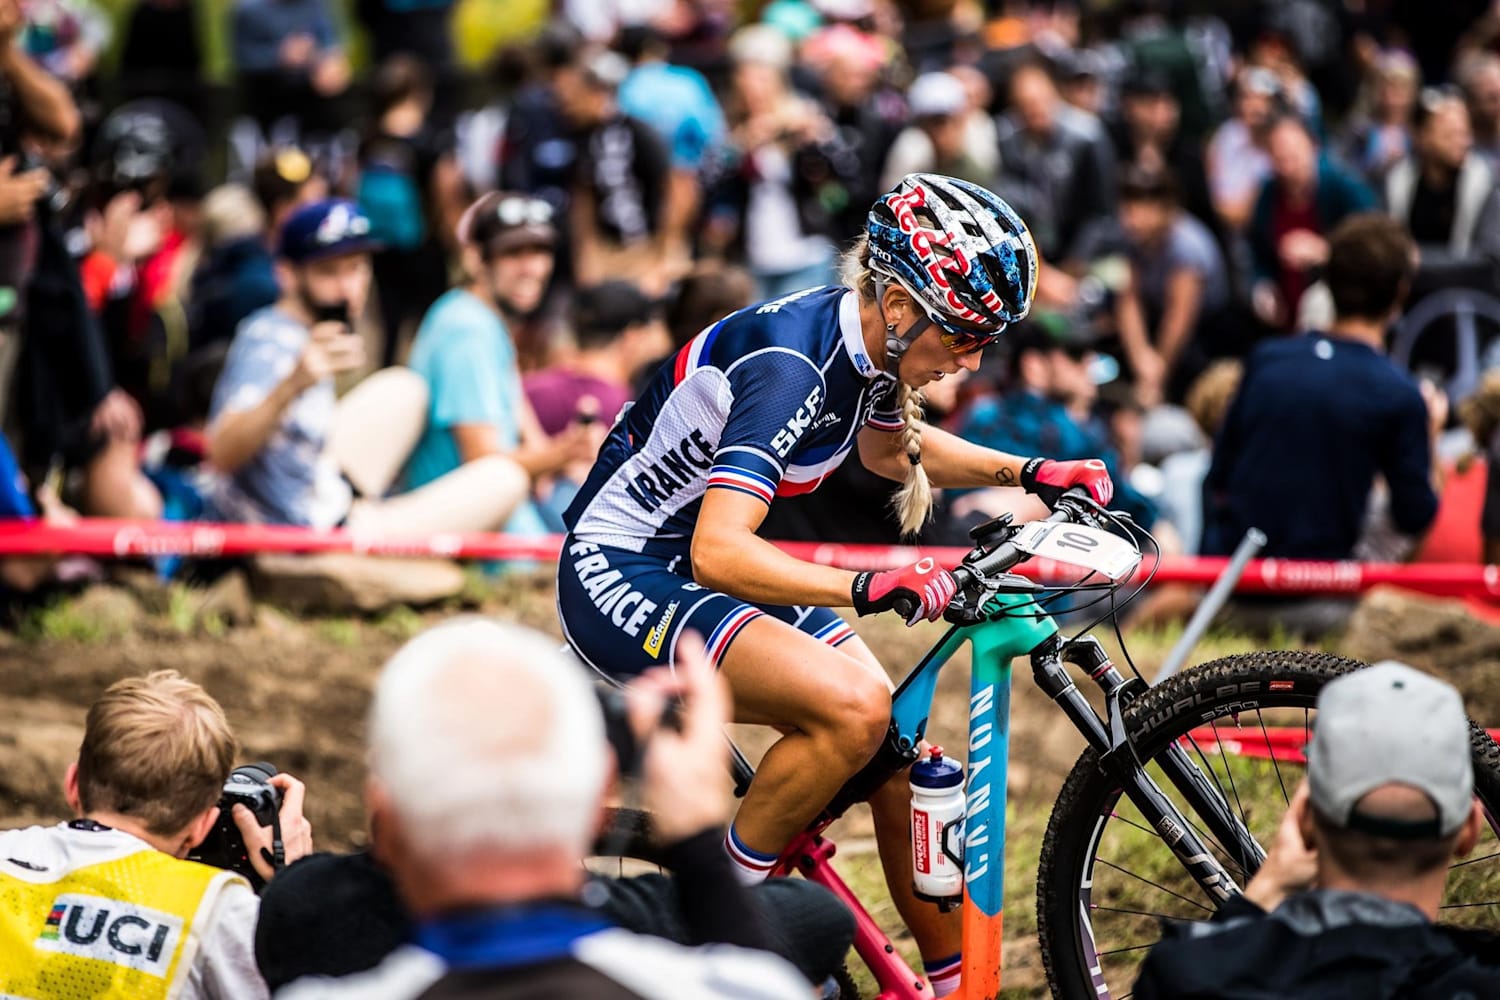 UCI MTB World Championships 2020: Leogang preview